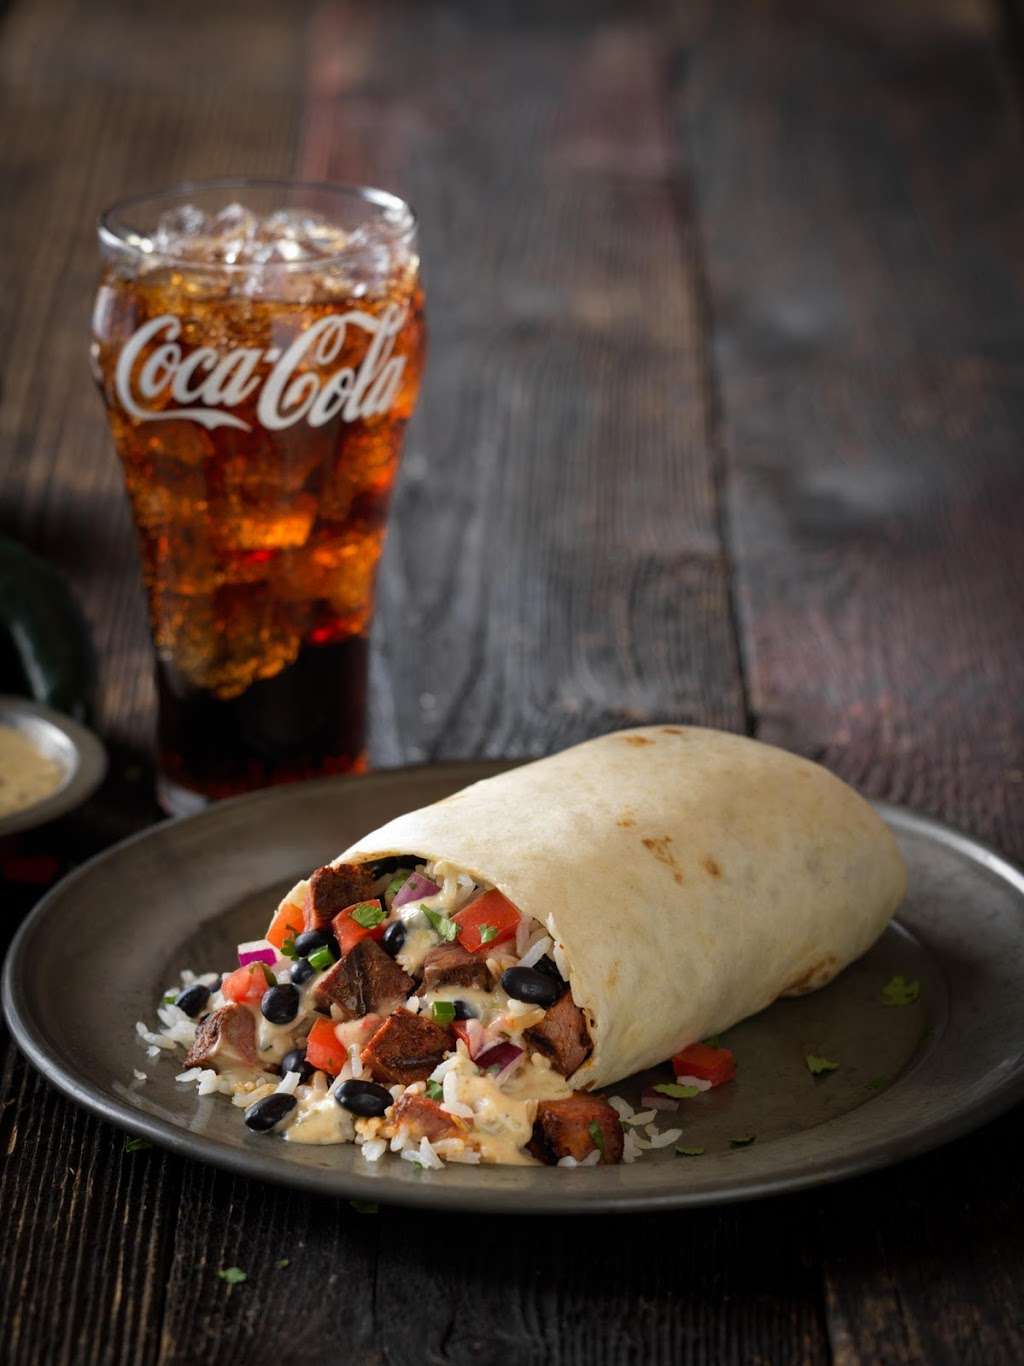 QDOBA Mexican Eats | 907 Indiana Ave, Ste A, Indianapolis, IN 46204 | Phone: (317) 423-3932